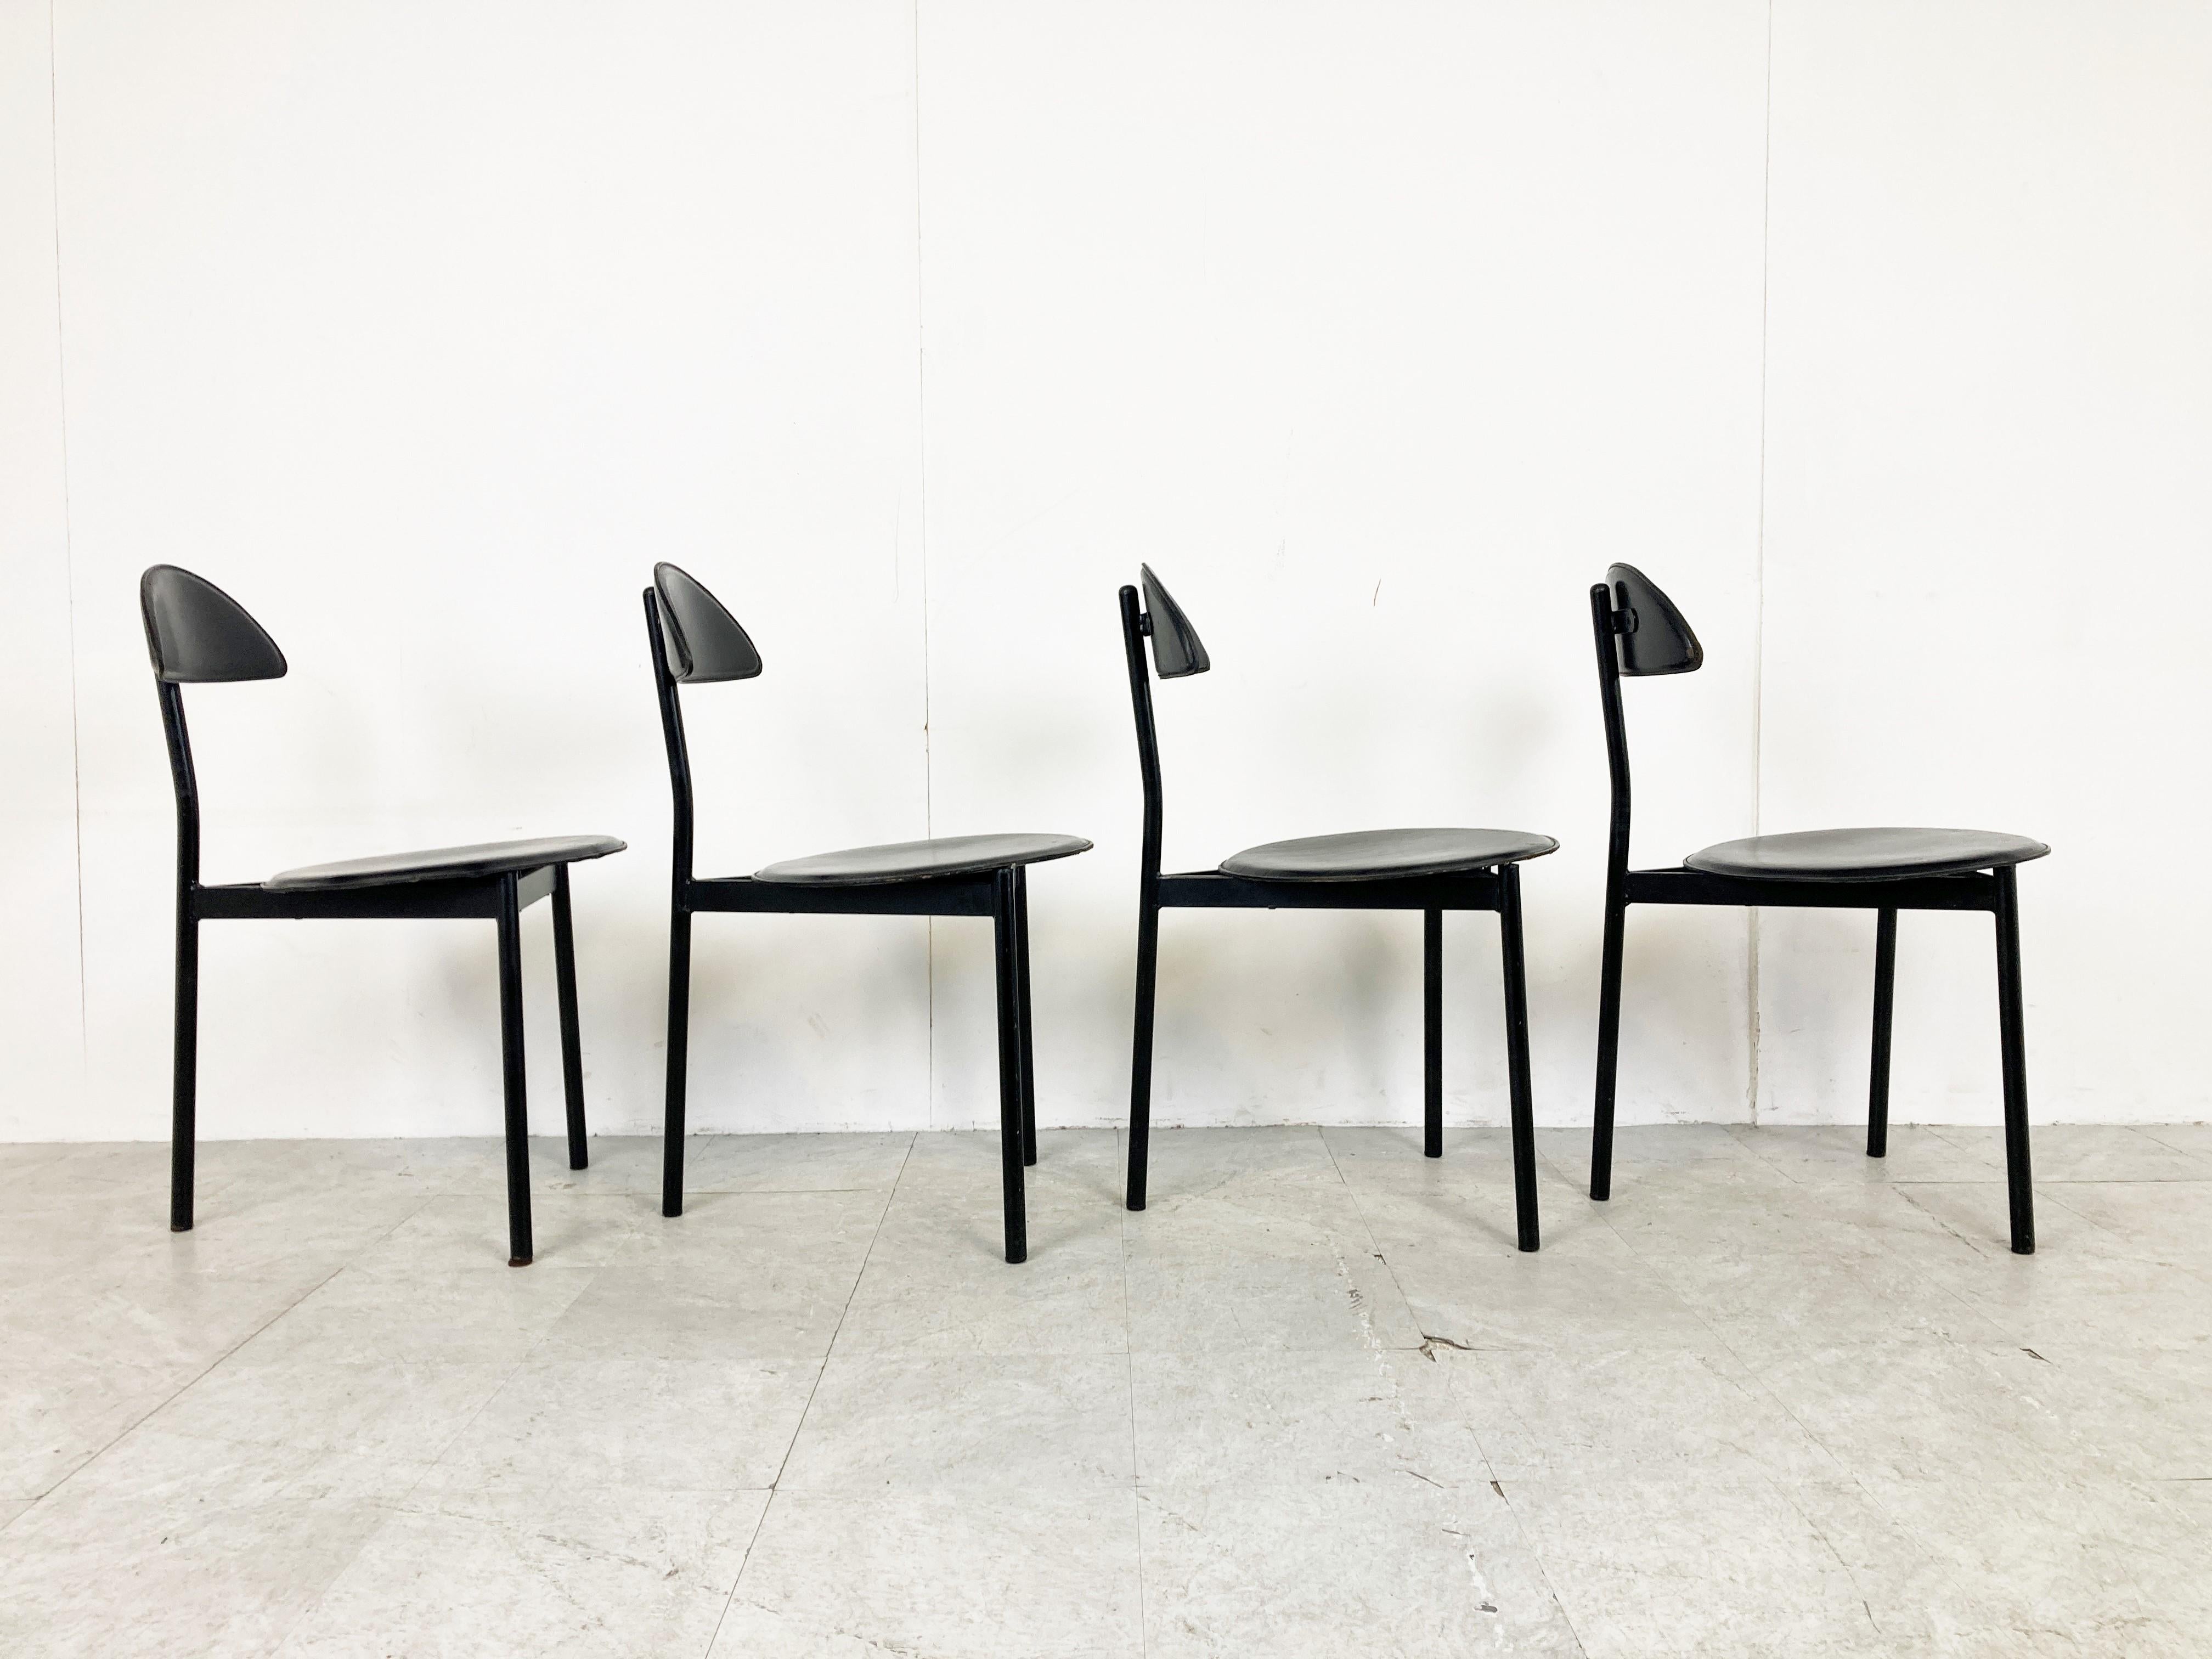 Late 20th Century Set of 4 Post Modern Dining Chairs by Linea Veam, 1980s For Sale